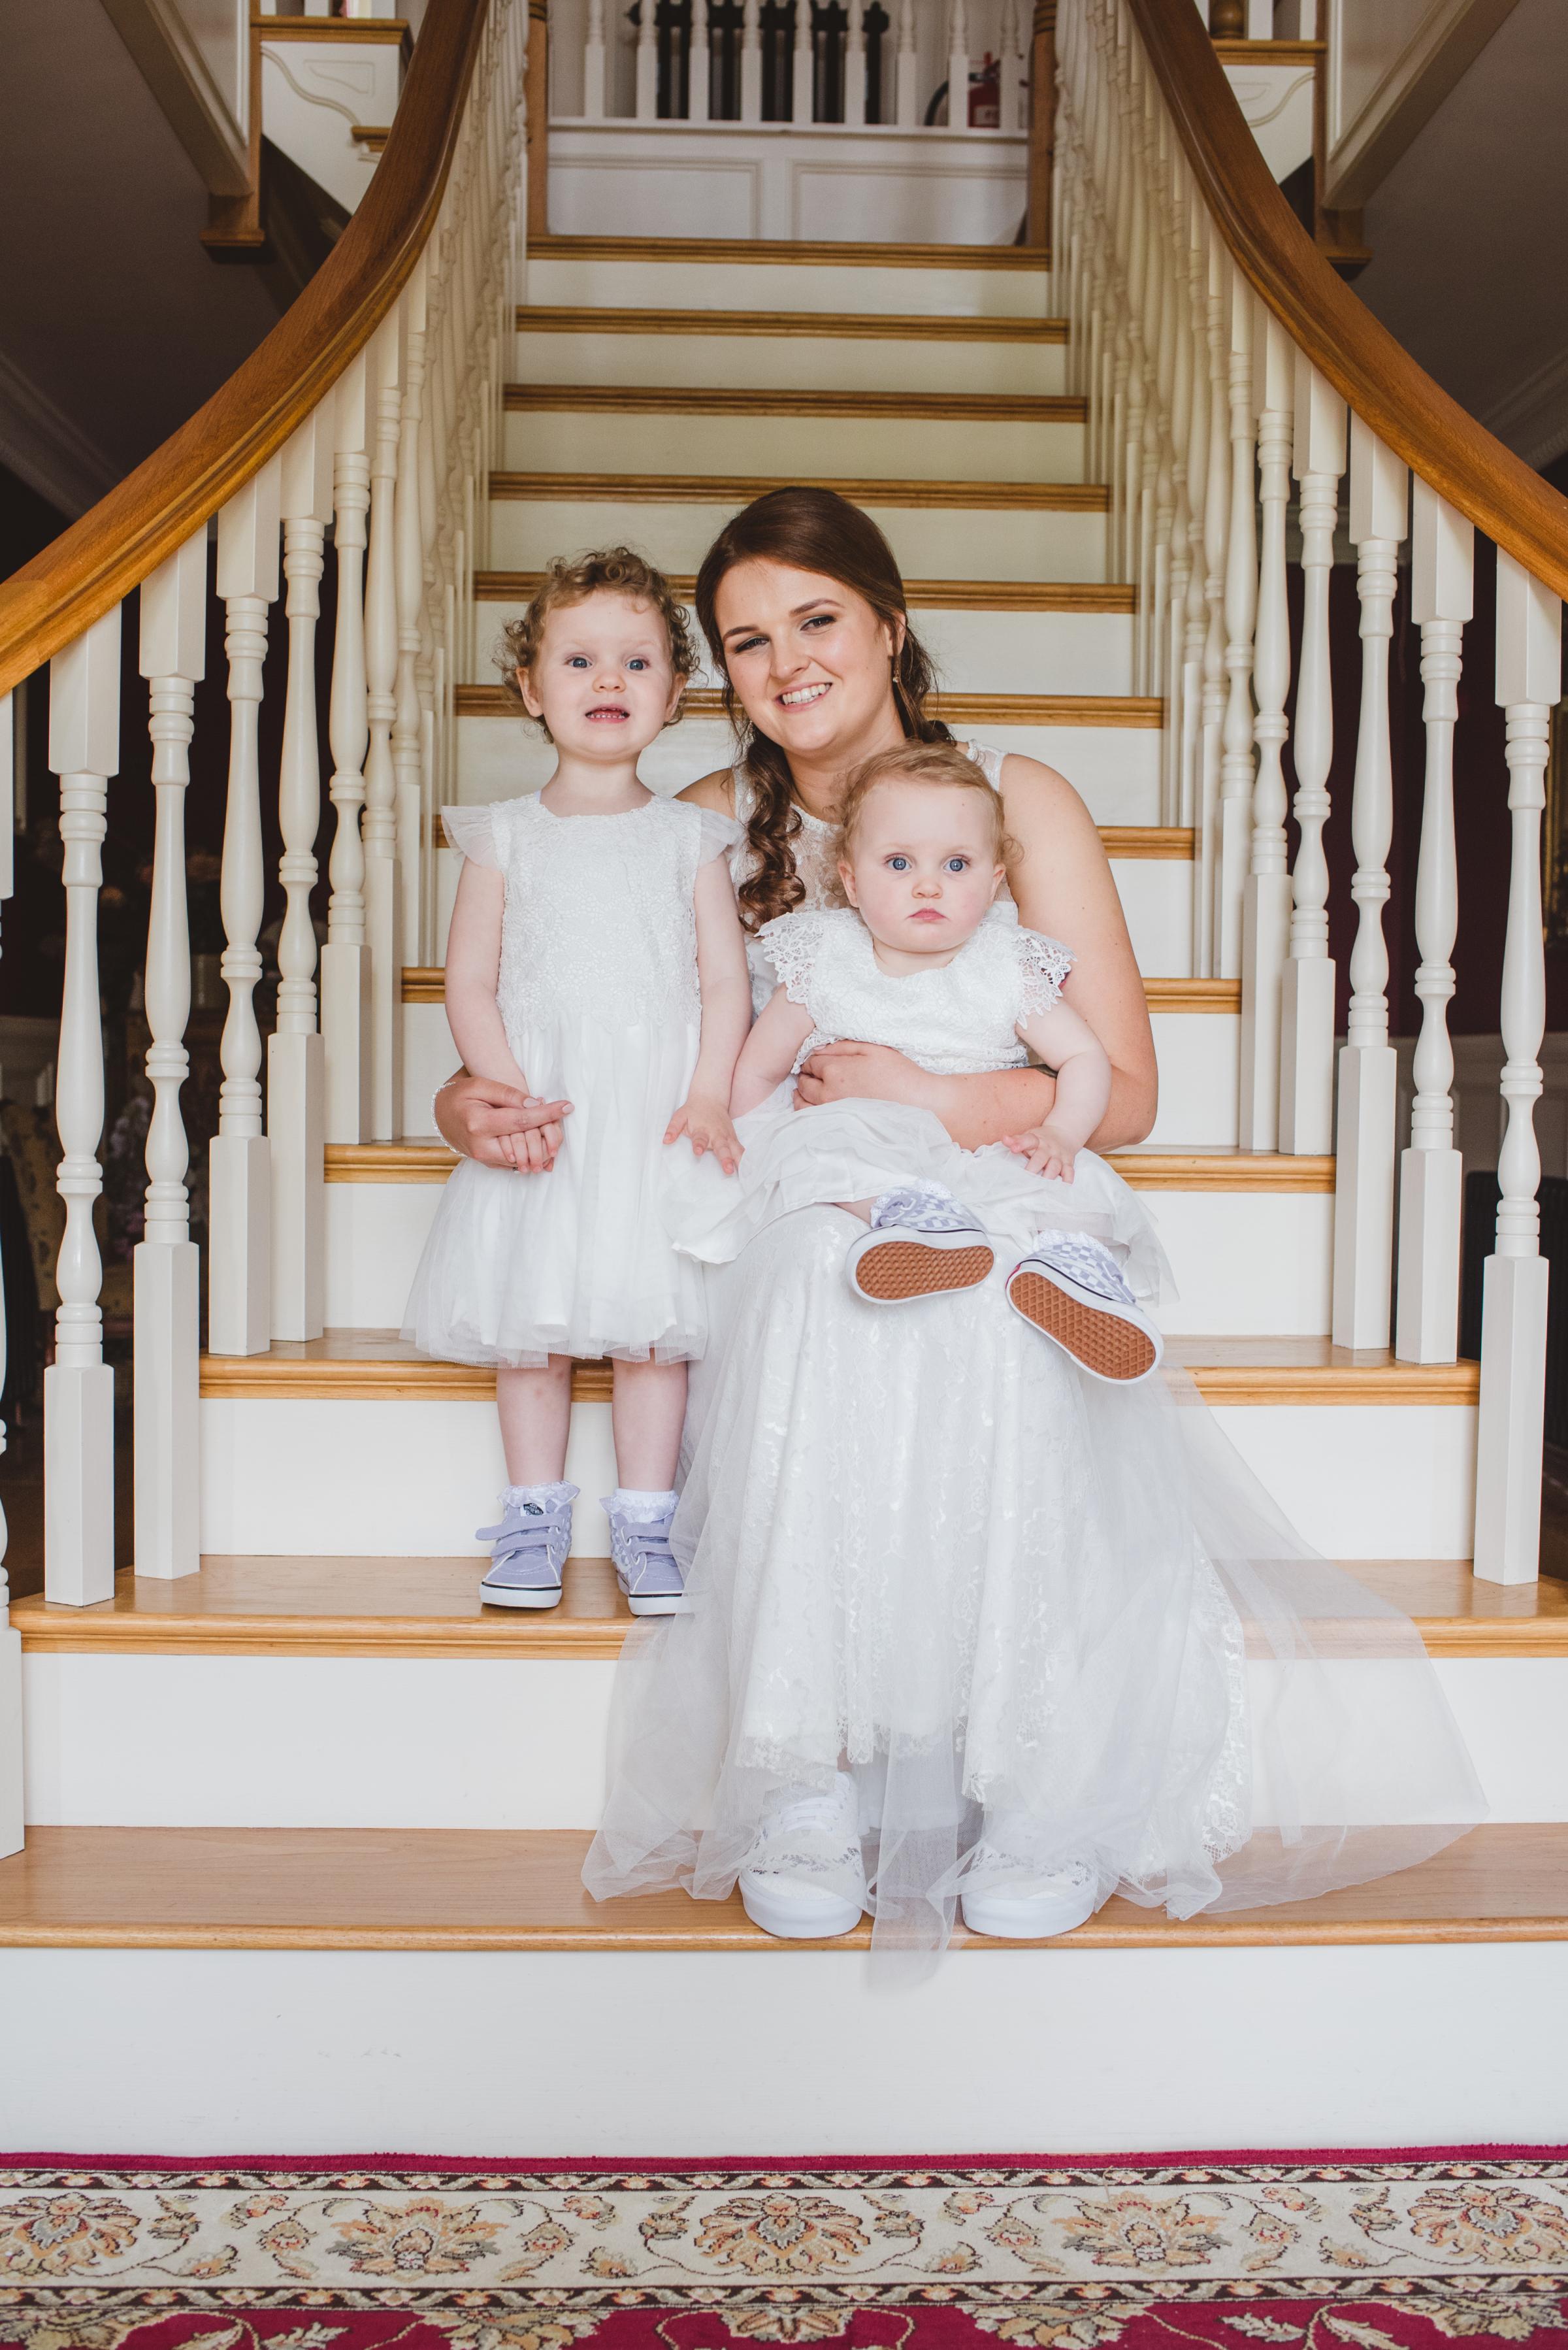 Lesa pictured with her and Daniels two daughters Wren and Robyn who were Flower Girls on the day. Photo: Erica Irvine.